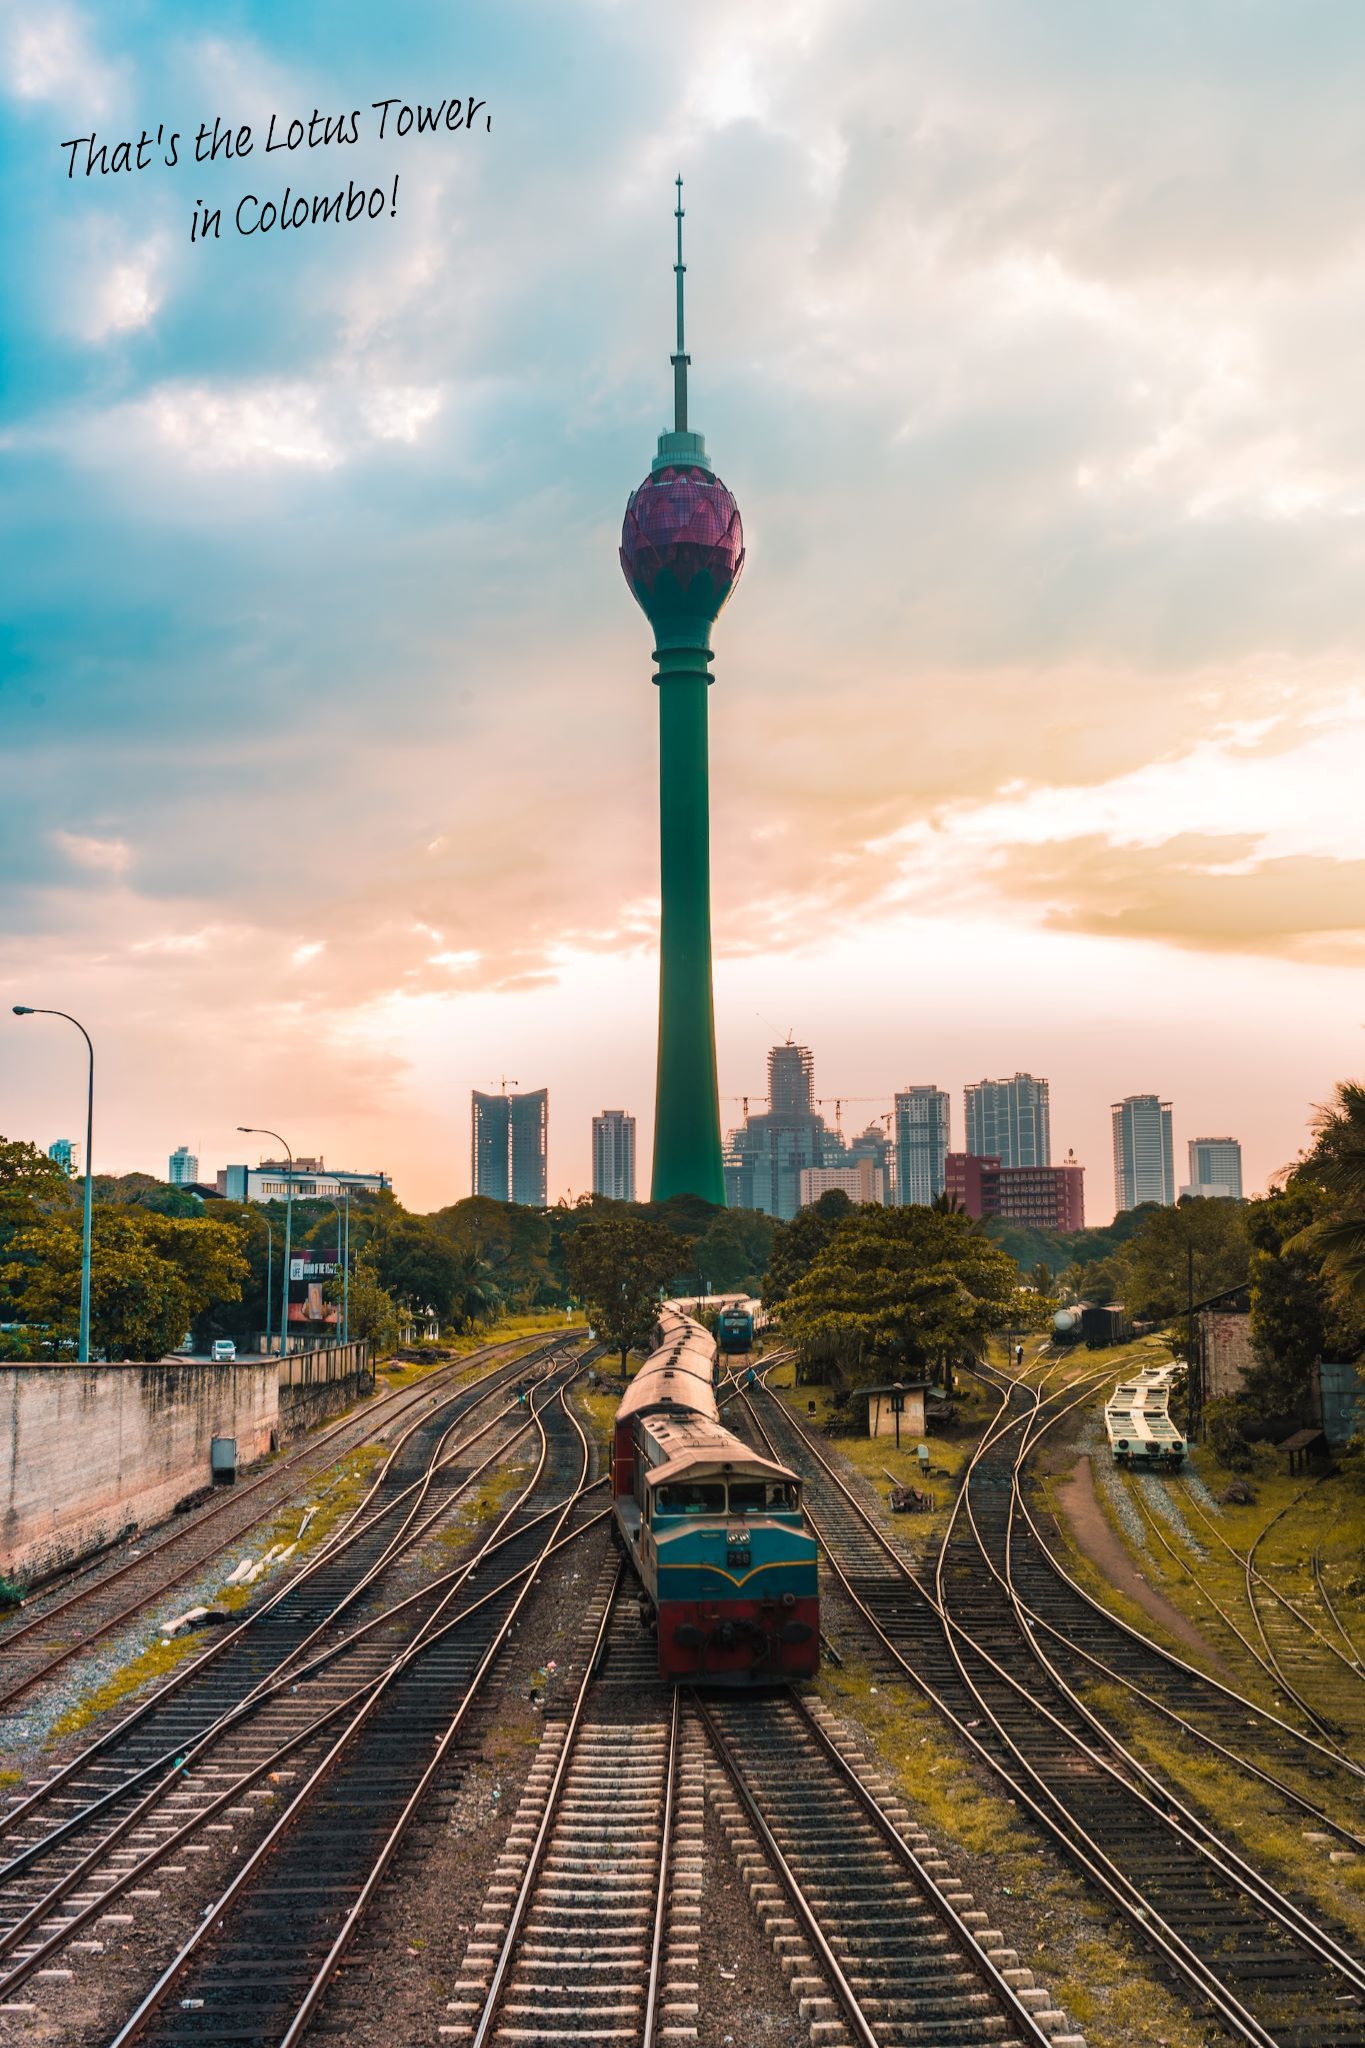 A train heads into Colombo, Sri Lanka, the Lotus Tower rising in the distance.